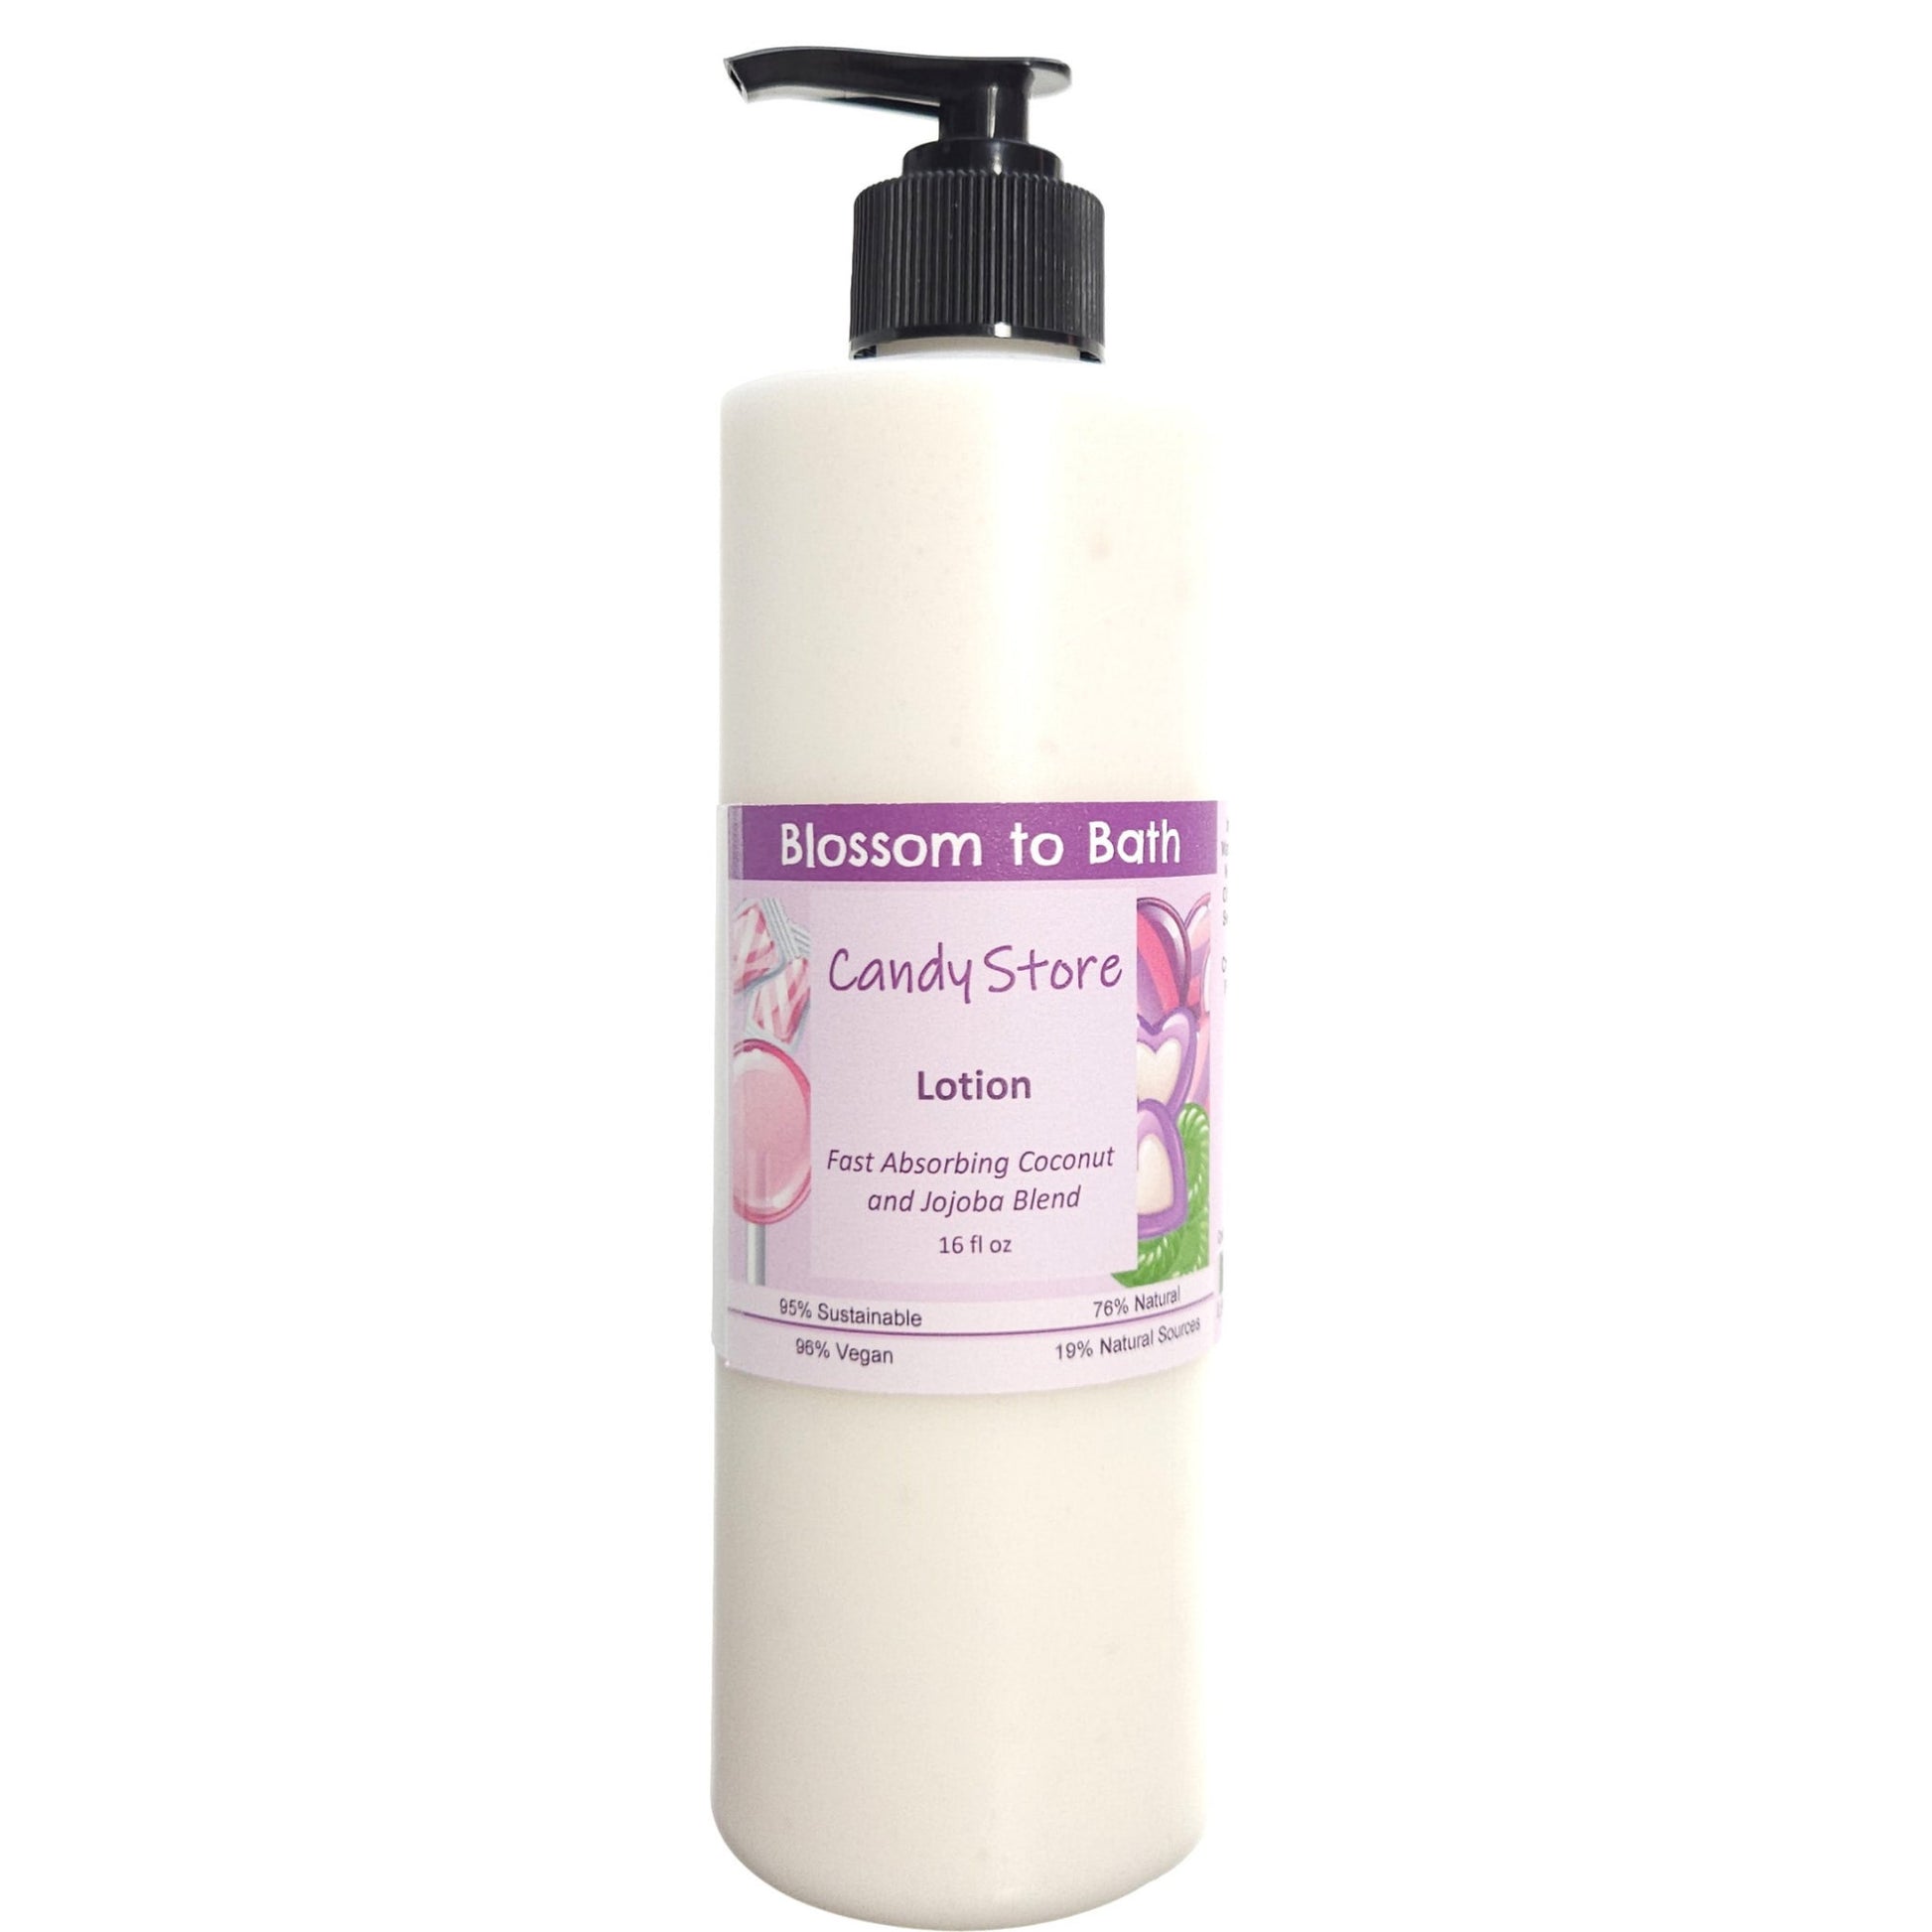 Buy Blossom to Bath Candy Store Lotion from Flowersong Soap Studio.  Daily moisture luxury that soaks in quickly made with organic oils and butters that soften and smooth the skin  A nostalgic fragrance has pops of sweet fruity bubbles on a bed of spun sugar and vanilla bean.